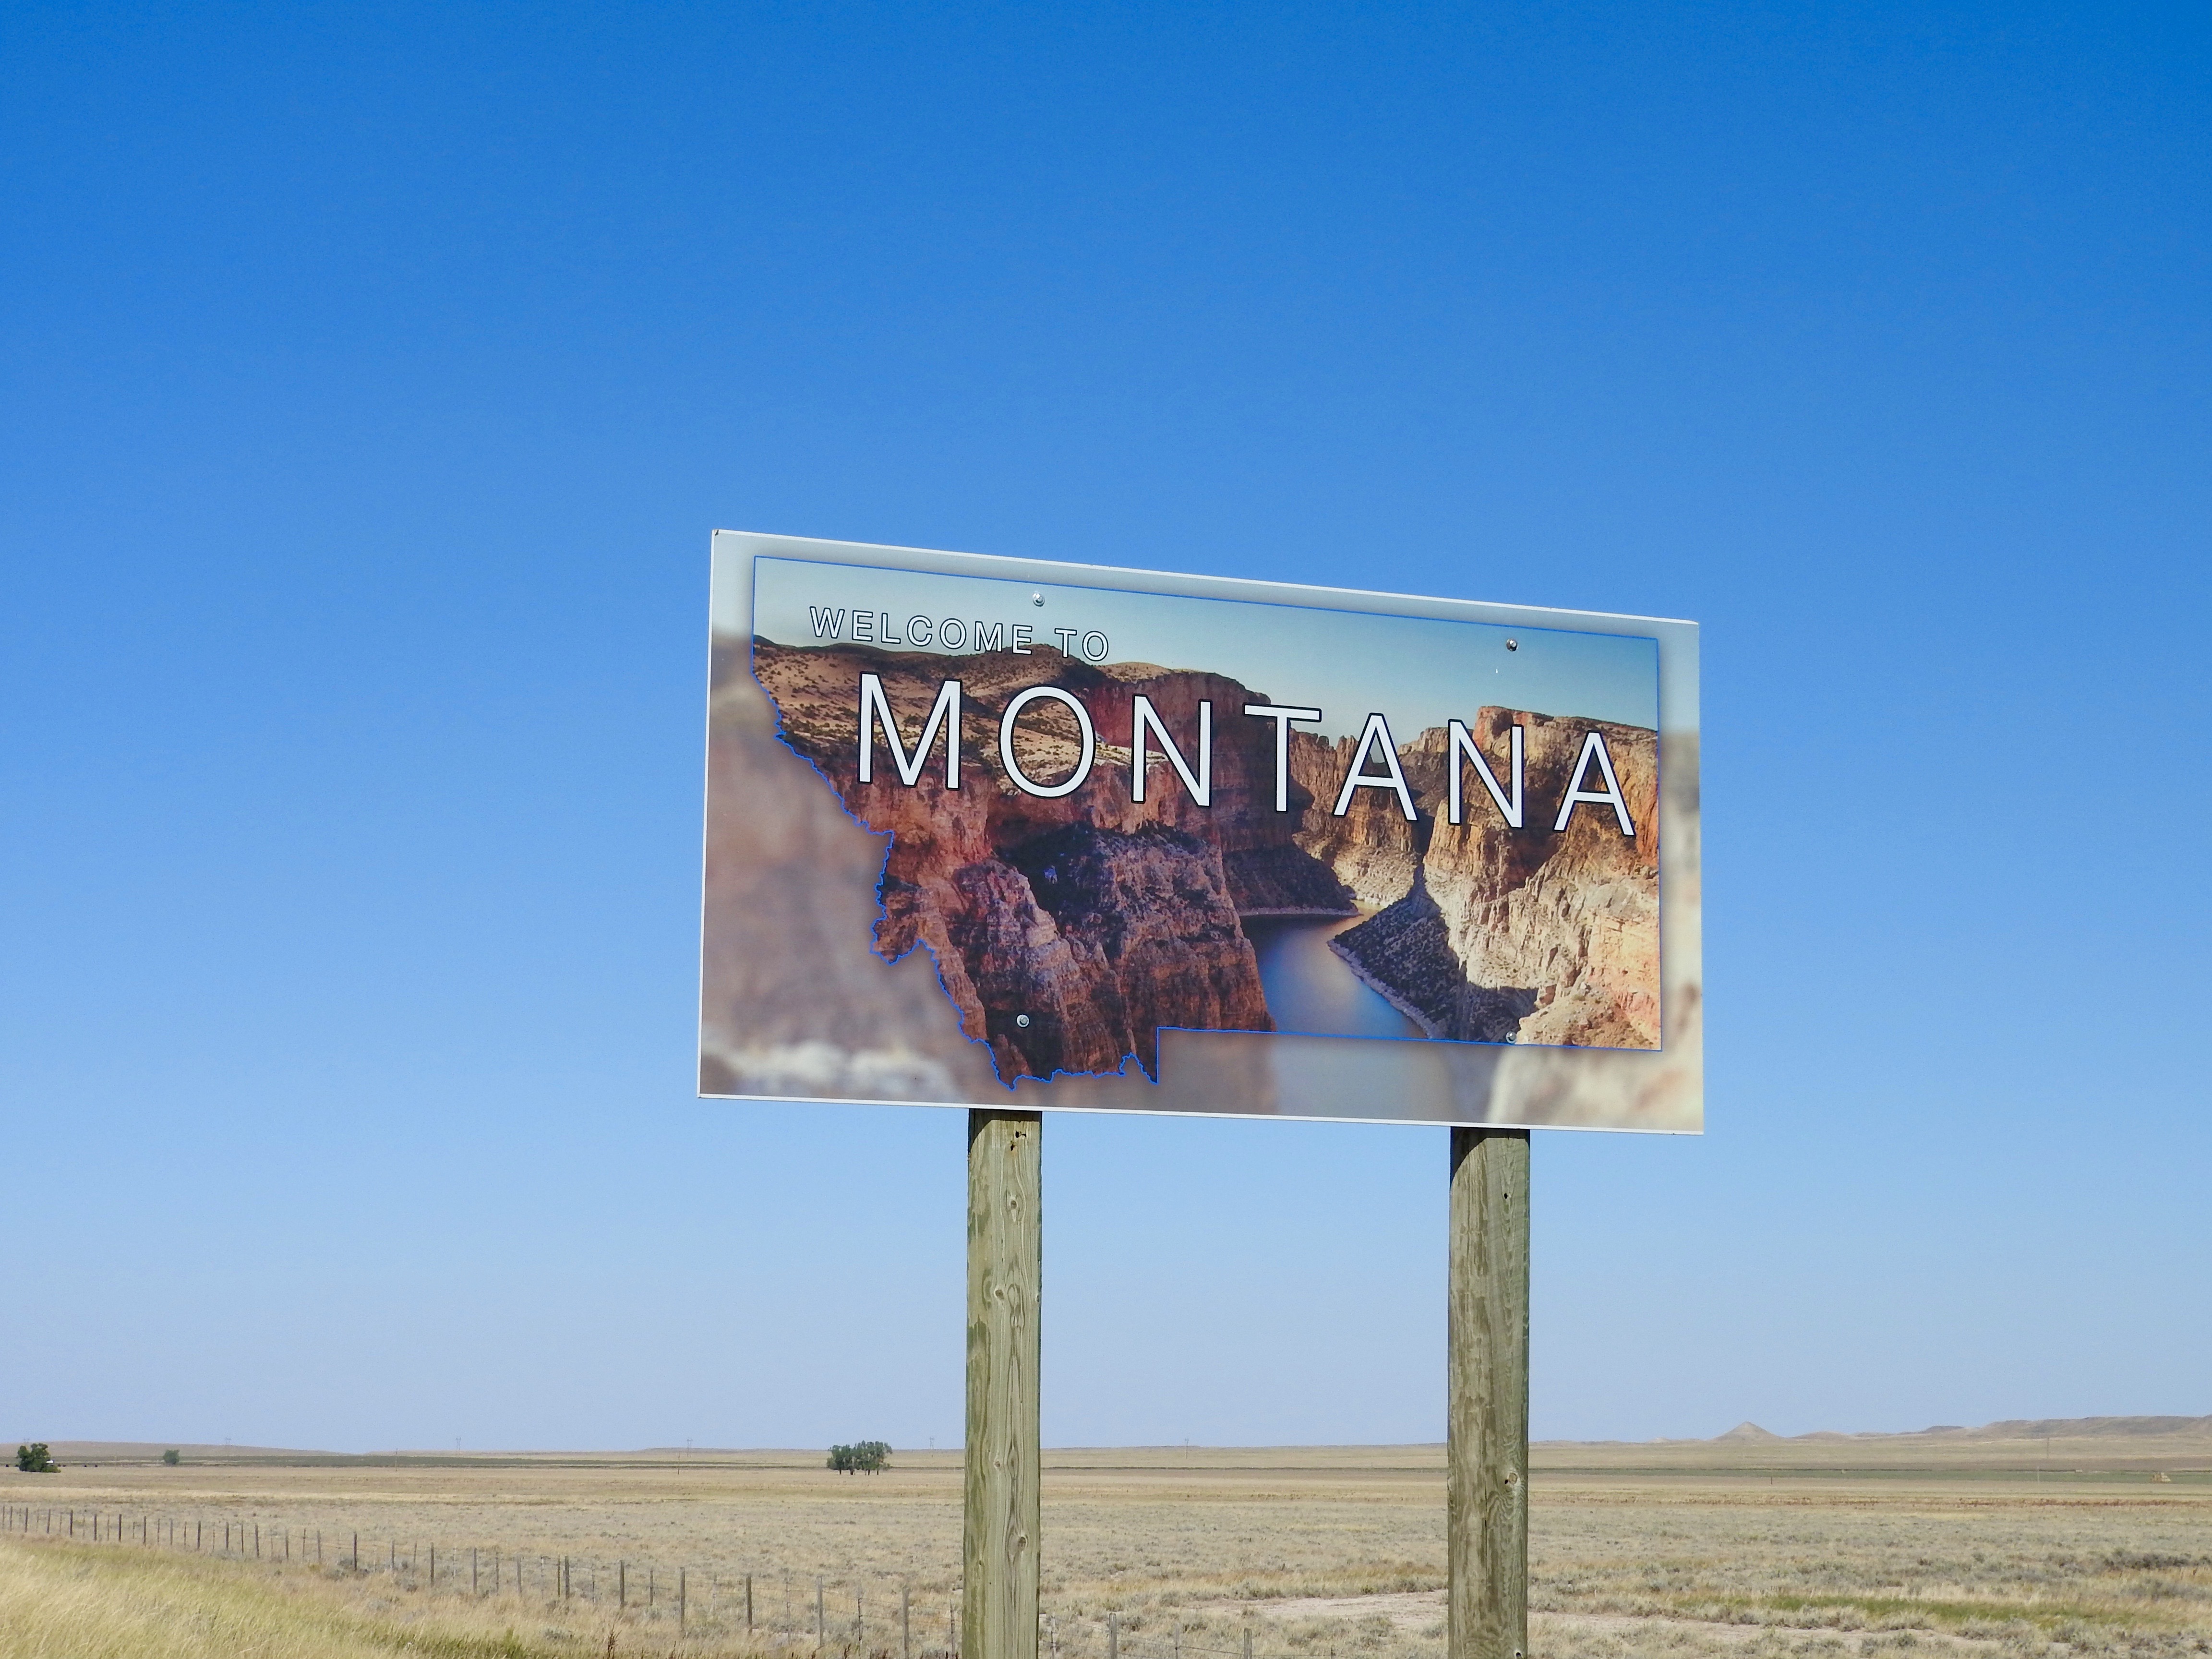 Crossing into Montana from Wyoming on the road to Alzada